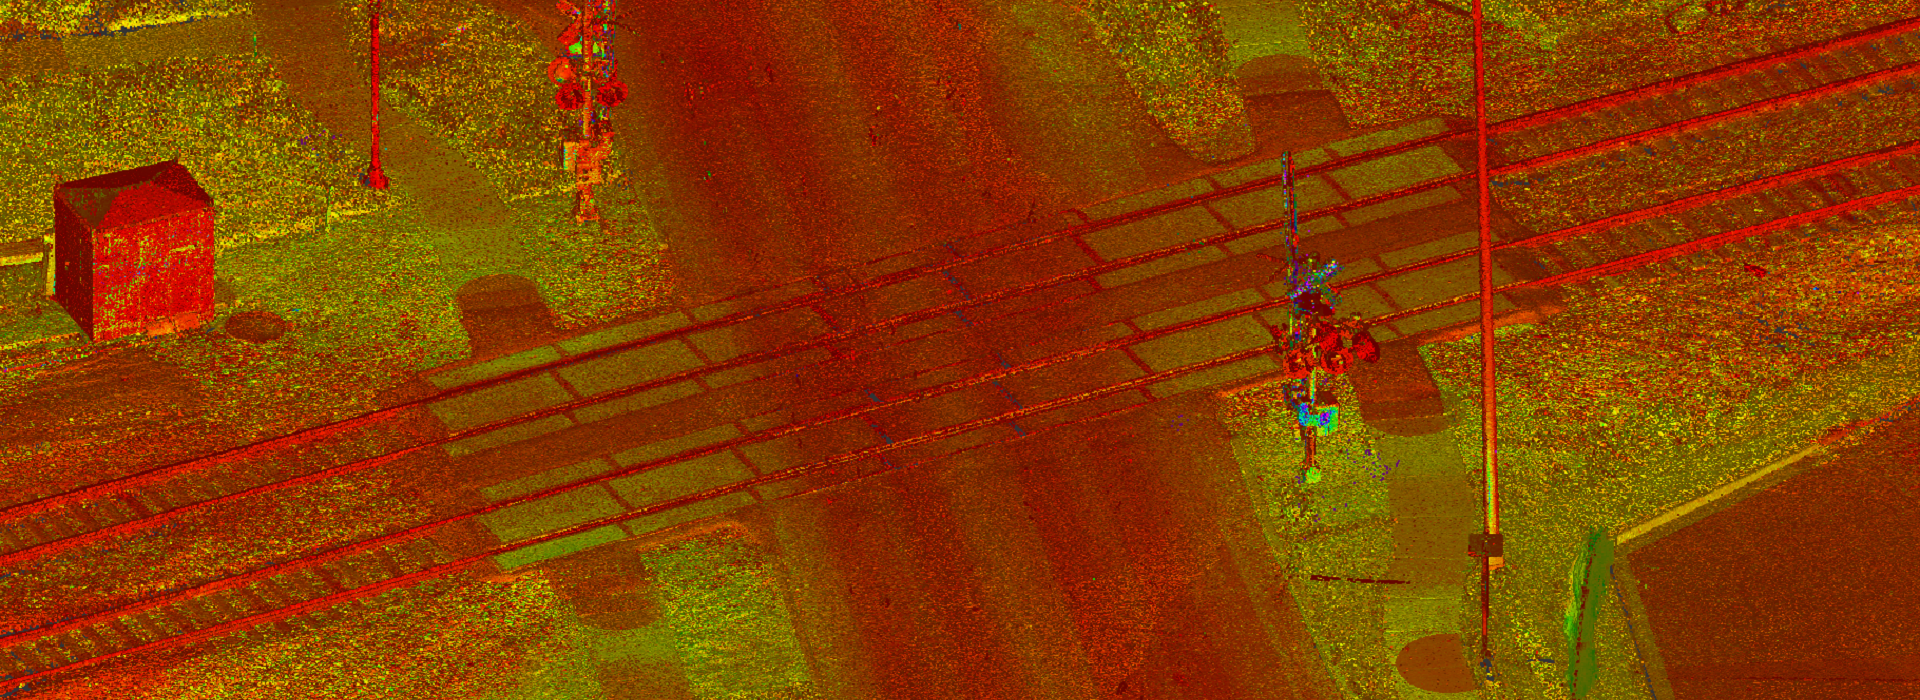 Laser scan point cloud of railroad crossing.